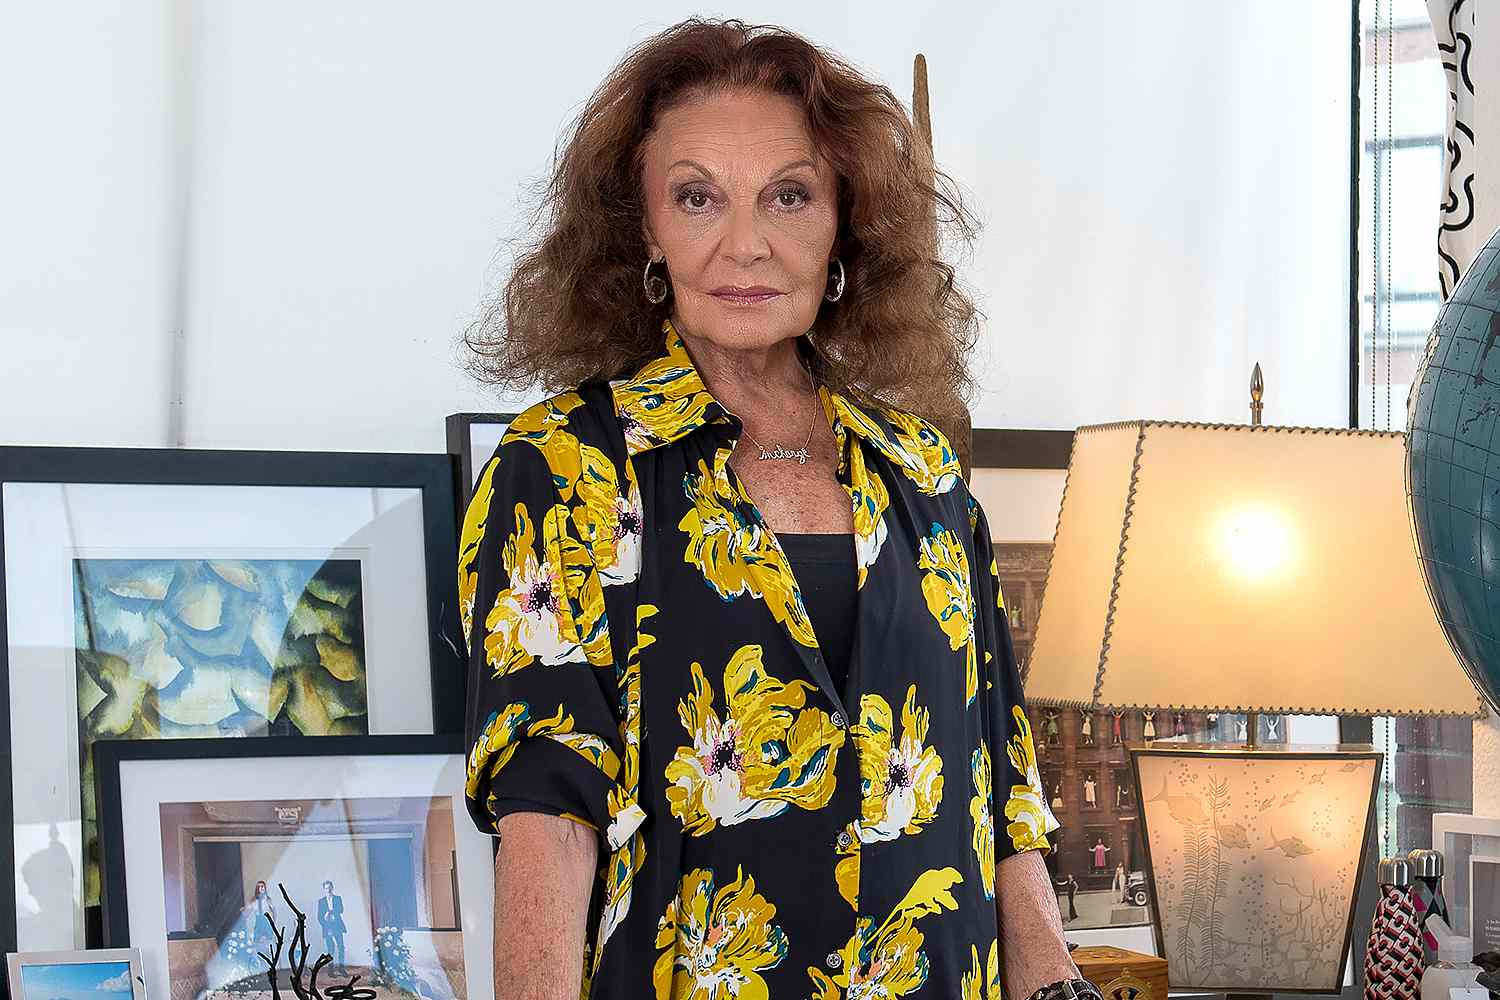 Diane von Furstenberg Reflects on Her Mother's Holocaust Survival Story: 'My Birth Was a Miracle' (Exclusive)